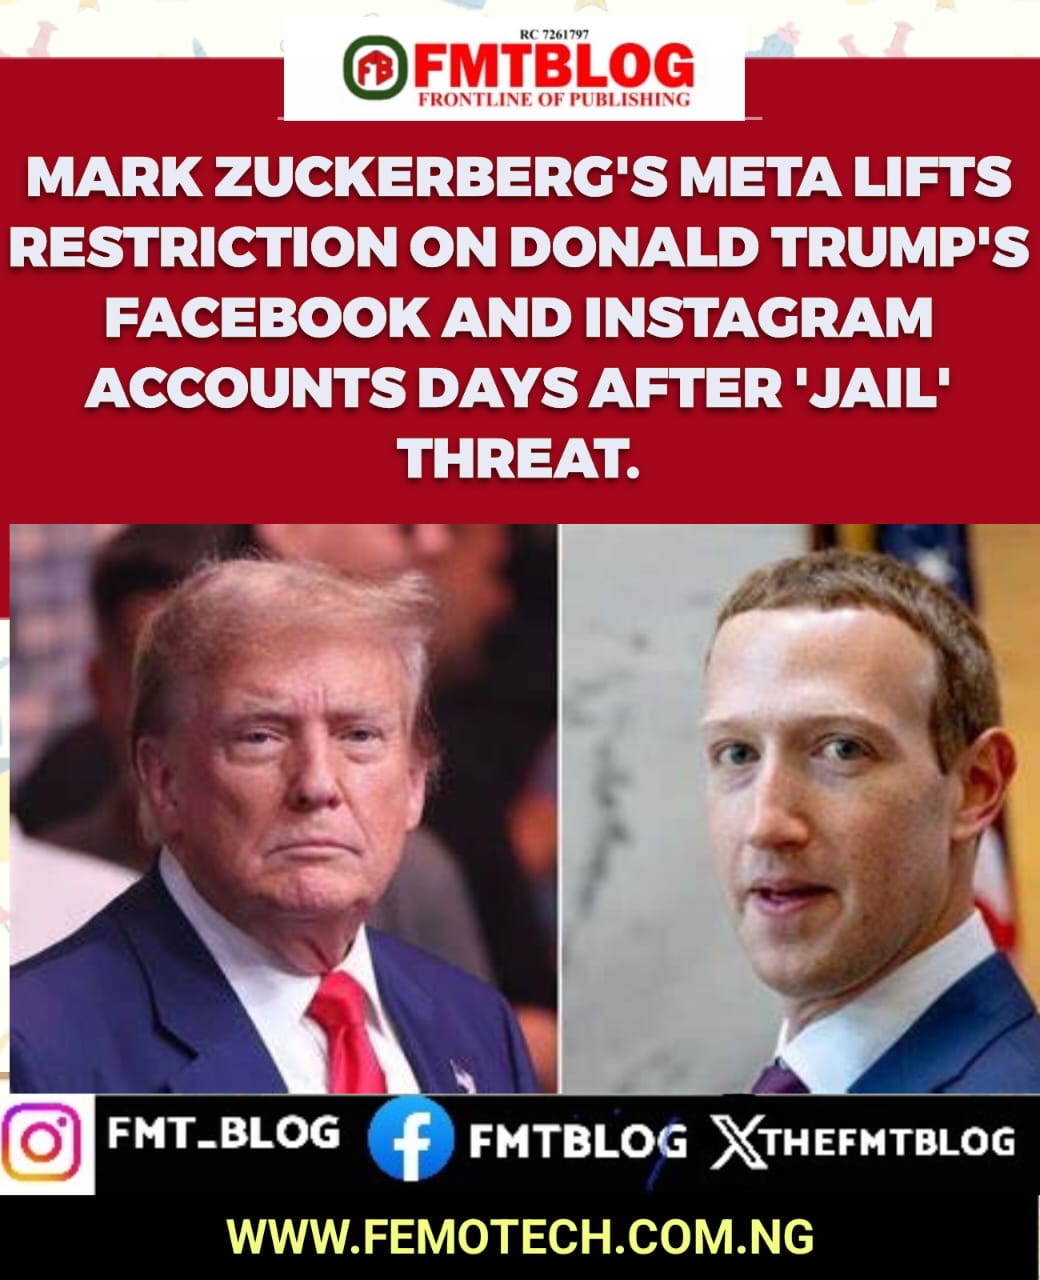 Mark Zuckerberg’s Meta Lifts Restriction On Donald Trump’s Facebook And Instagram Accounts Days After ‘Jail’ Threat